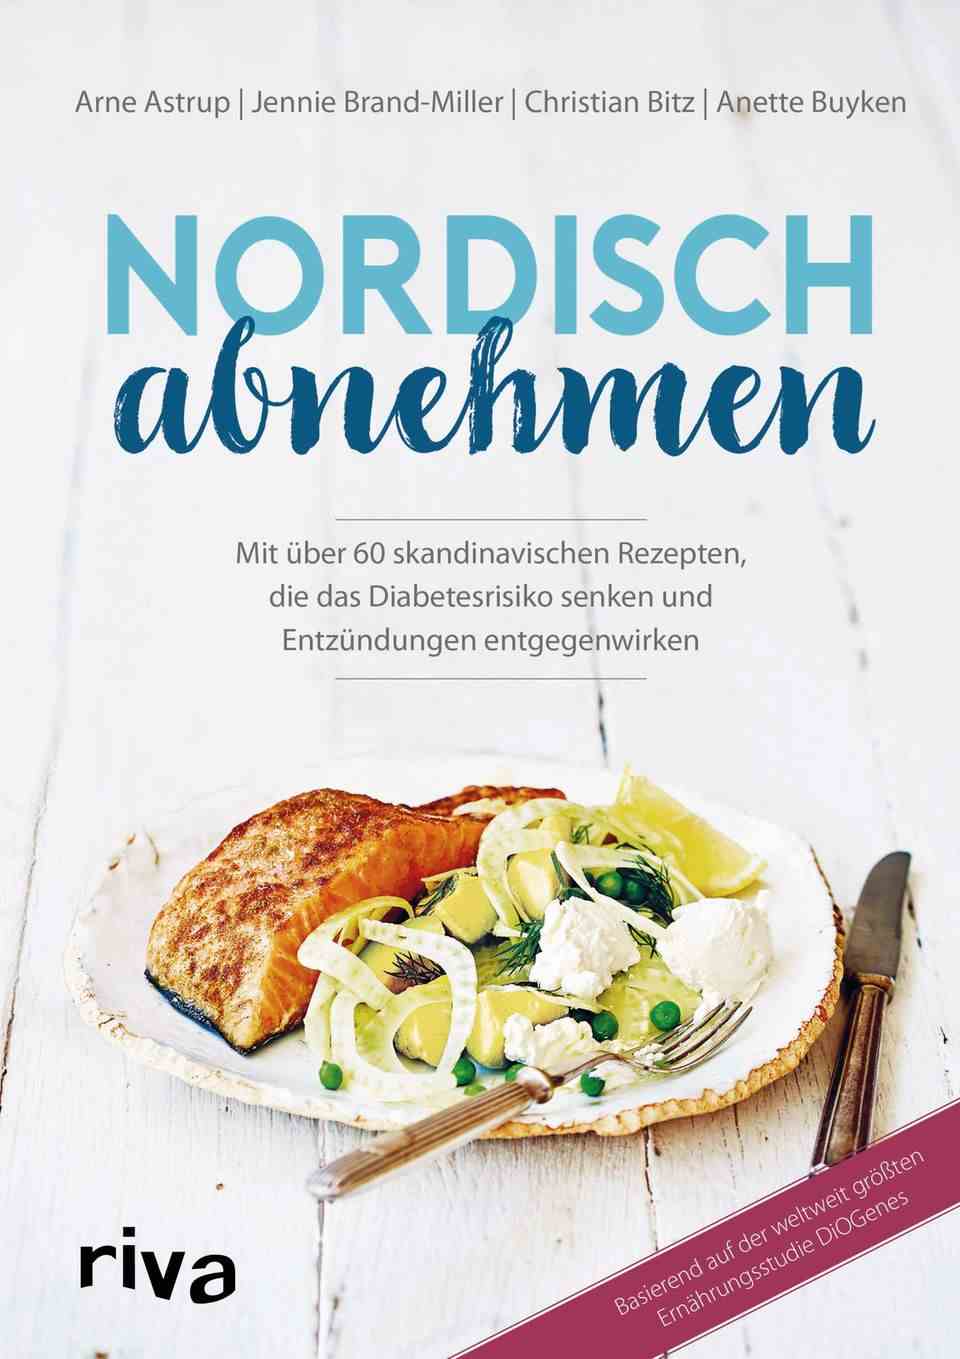 More information and recipes for the Nordic diet in: Nordic weight loss.  Riva publishing house.  240 pages.  19.99 euros.